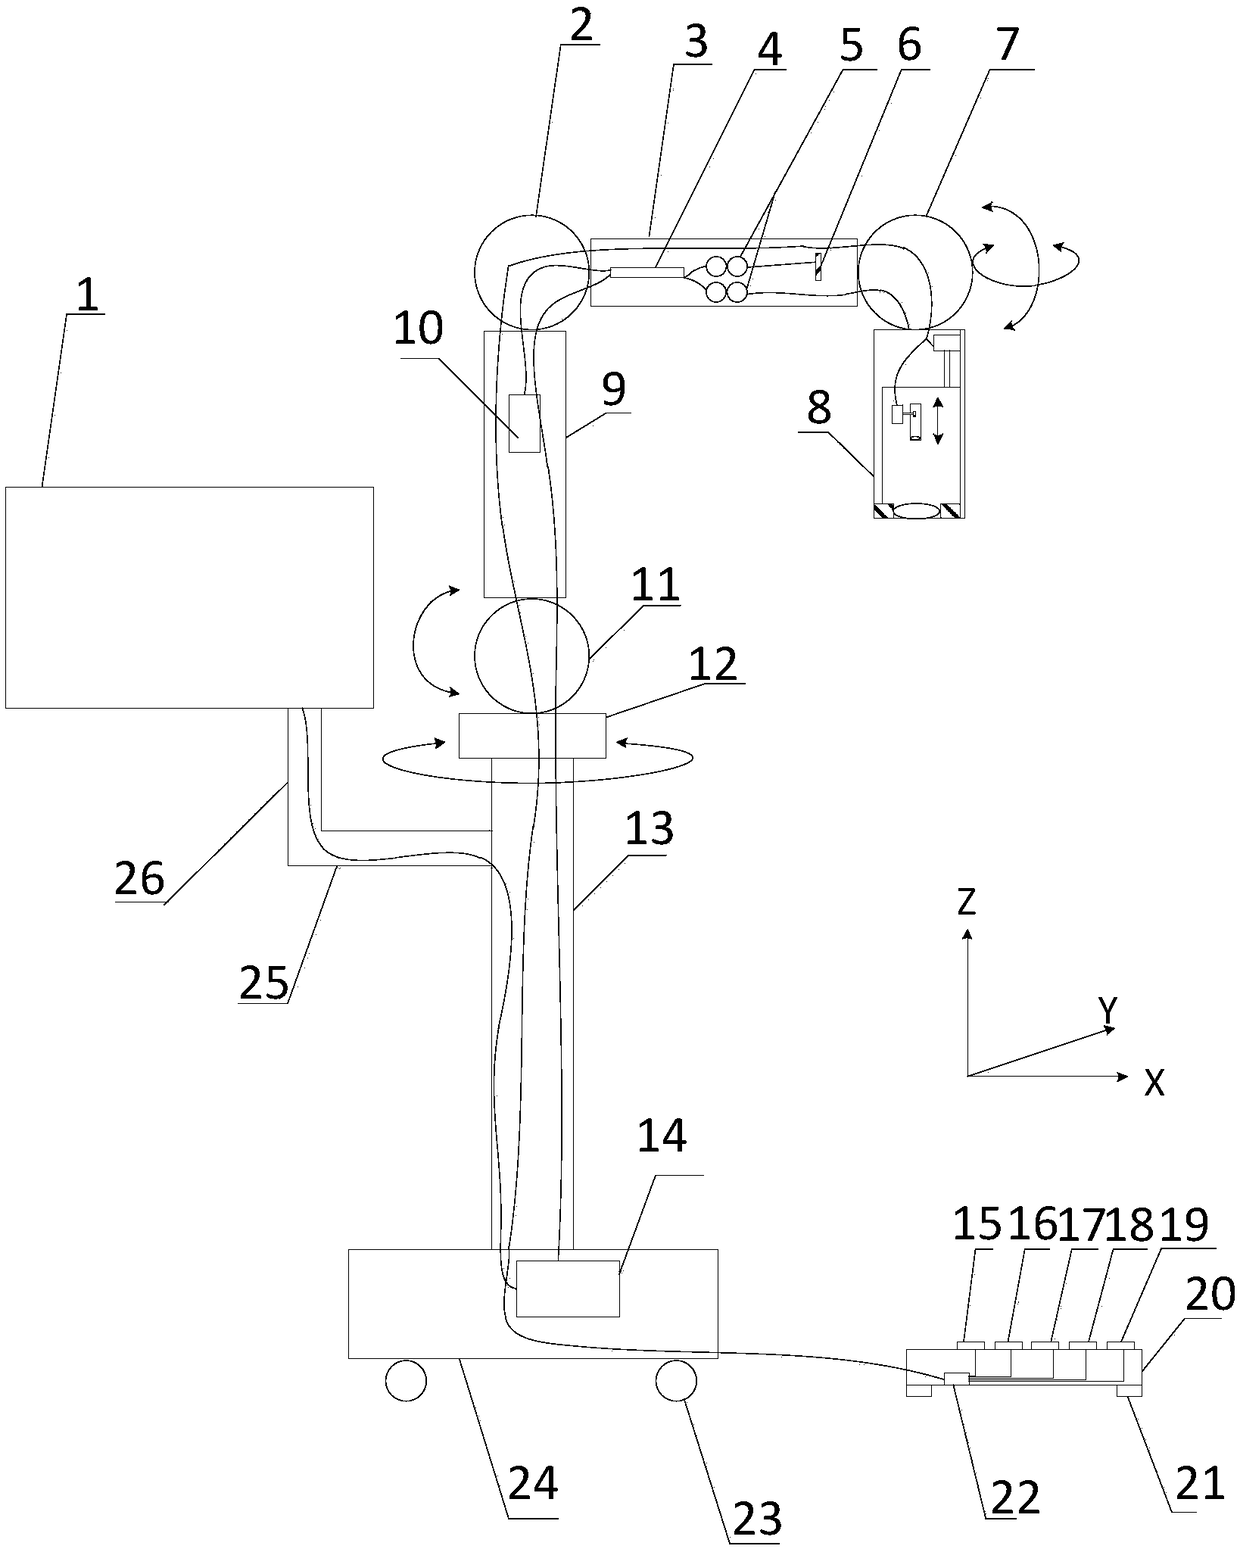 Device for achieving intraoperative evaluation of ophthalmic surgery